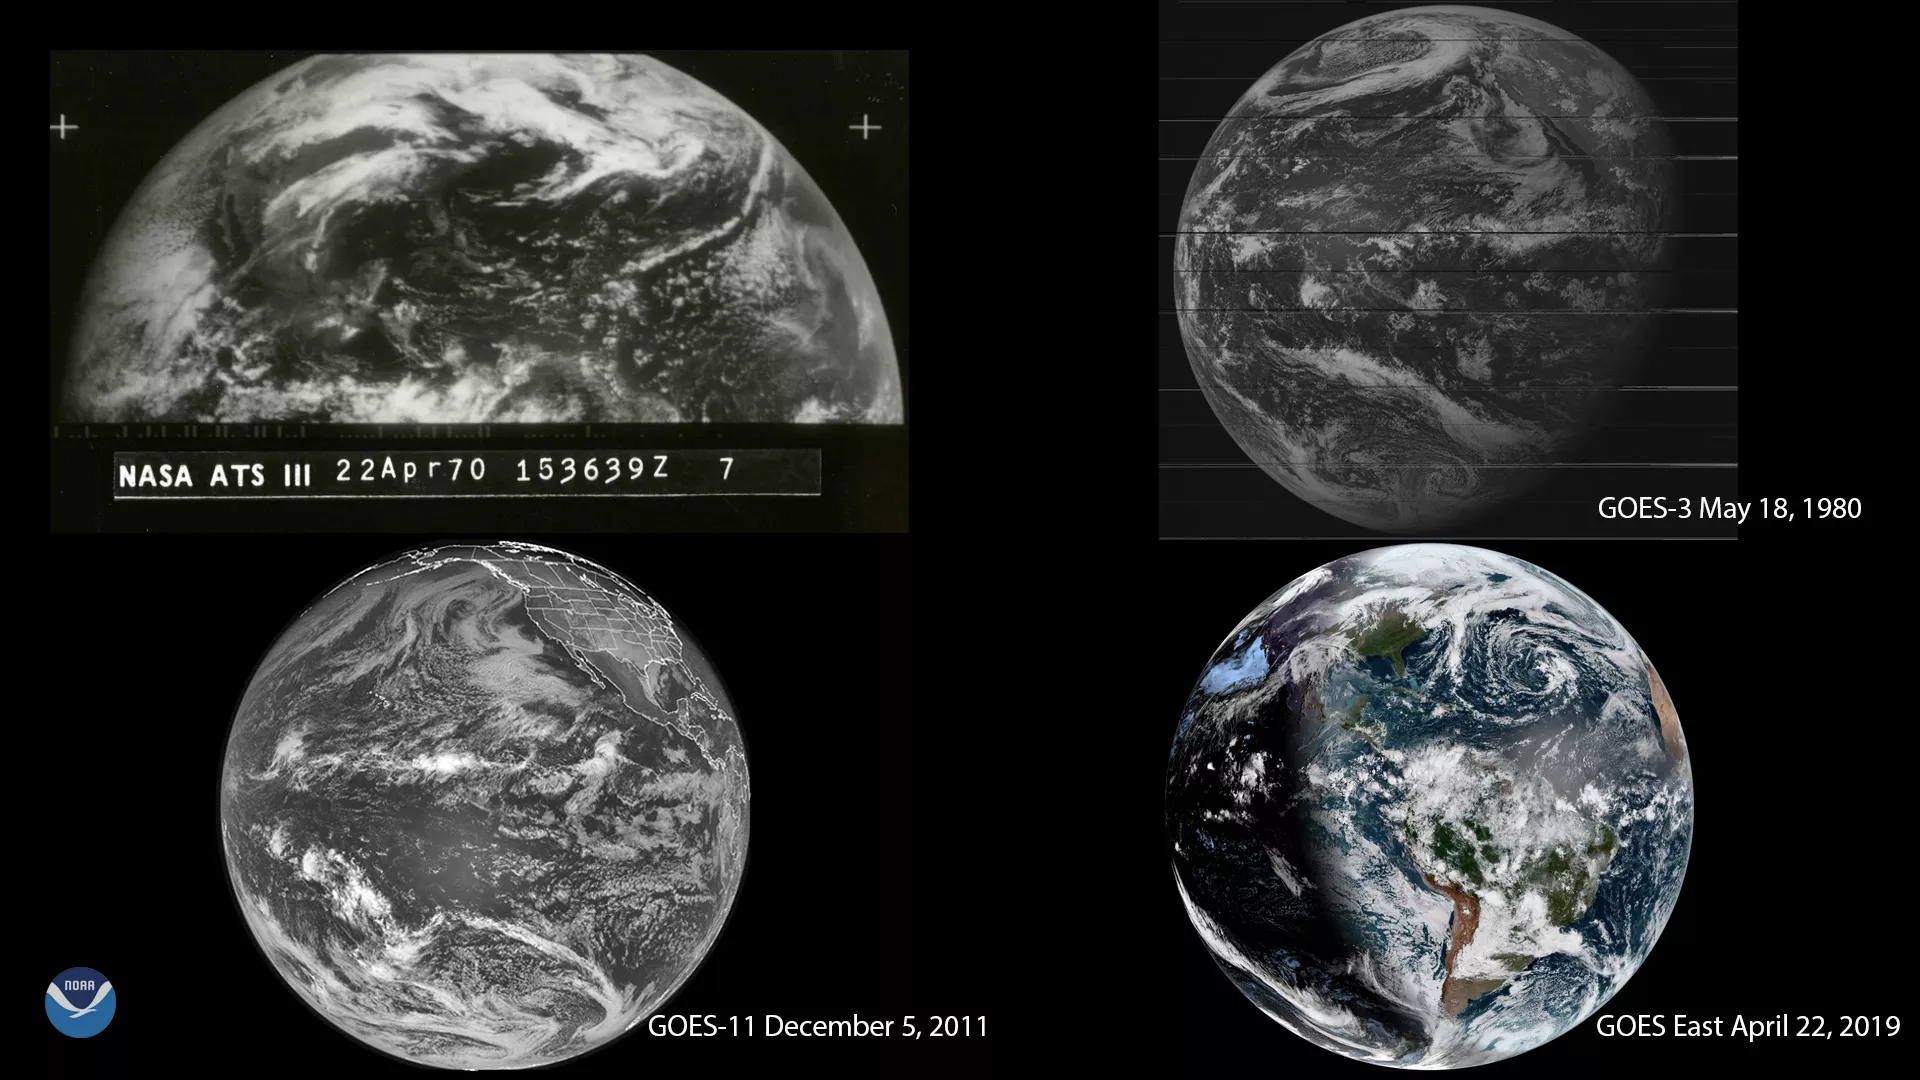 Four satellite images of Earth. The first from NASA ATS-3 on April 22, 1970, the second from GOES-3 satellite on May 18, 1980, the third from GOES-11 on December 5, 2011, and the forth from GOES East on April 22, 2019.